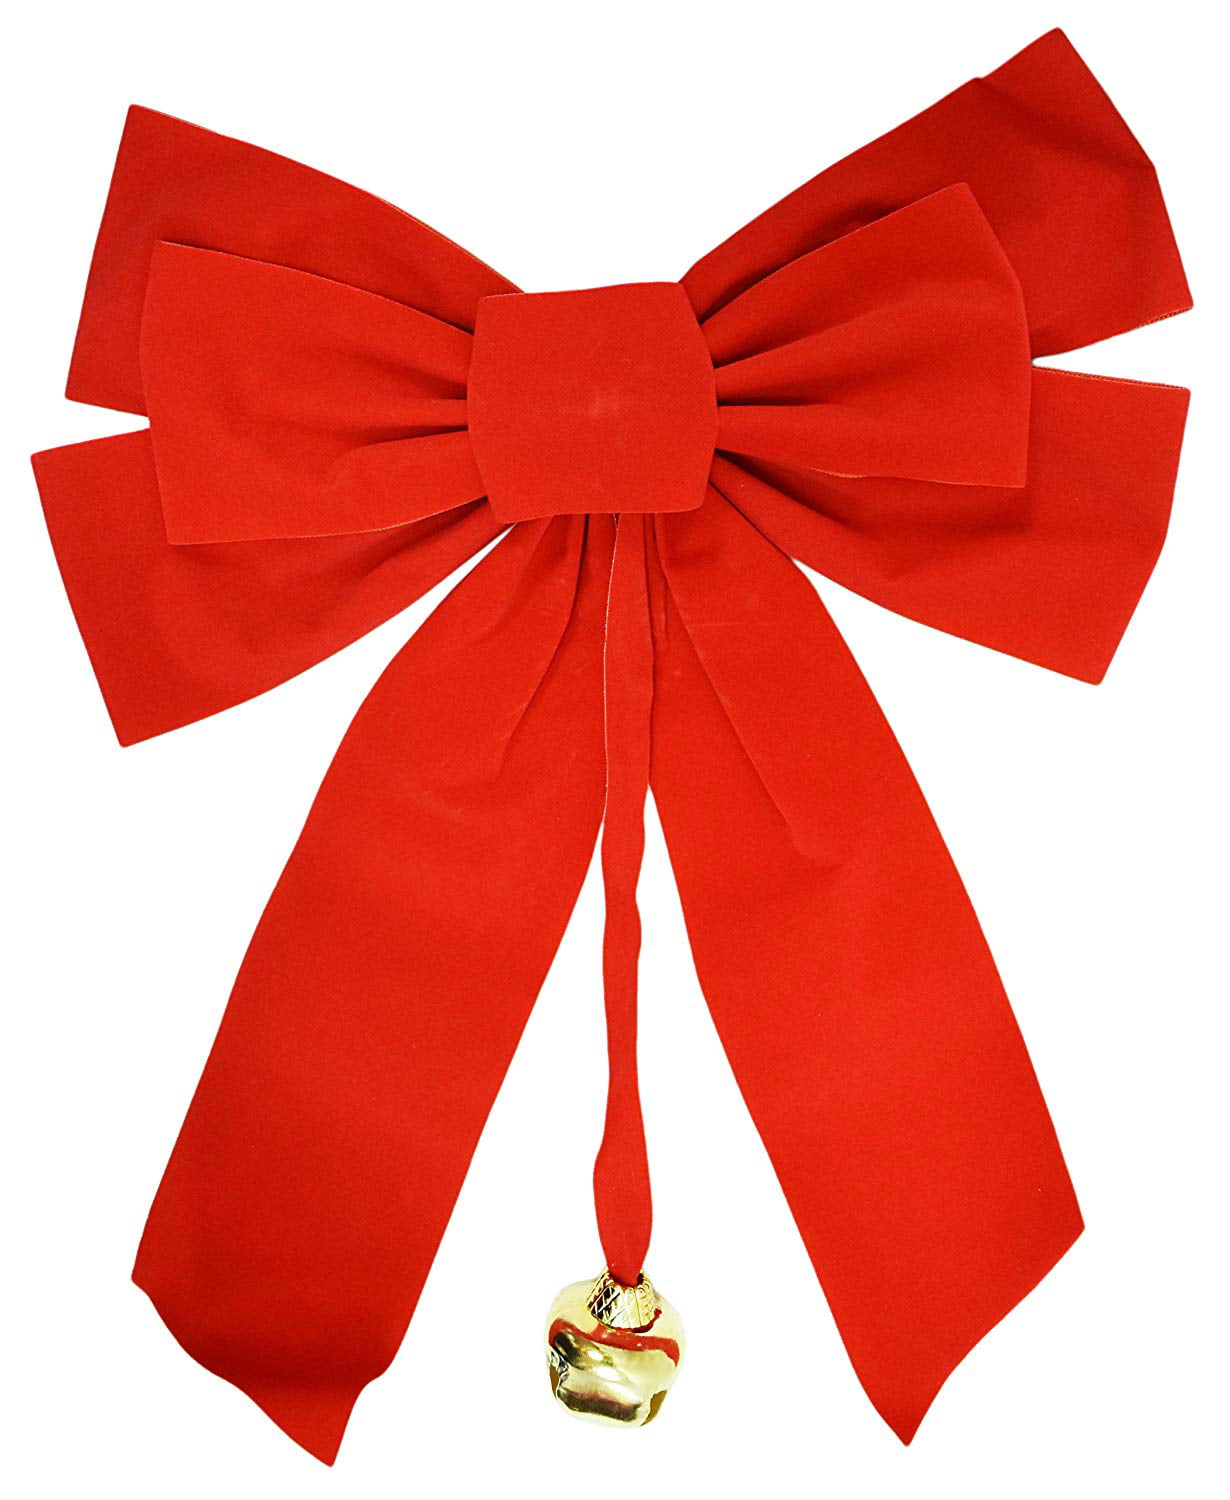 20 LOOP 50-5.5"  RED CHRISTMAS PULL BOWS~RED  Ribbon 50ct 